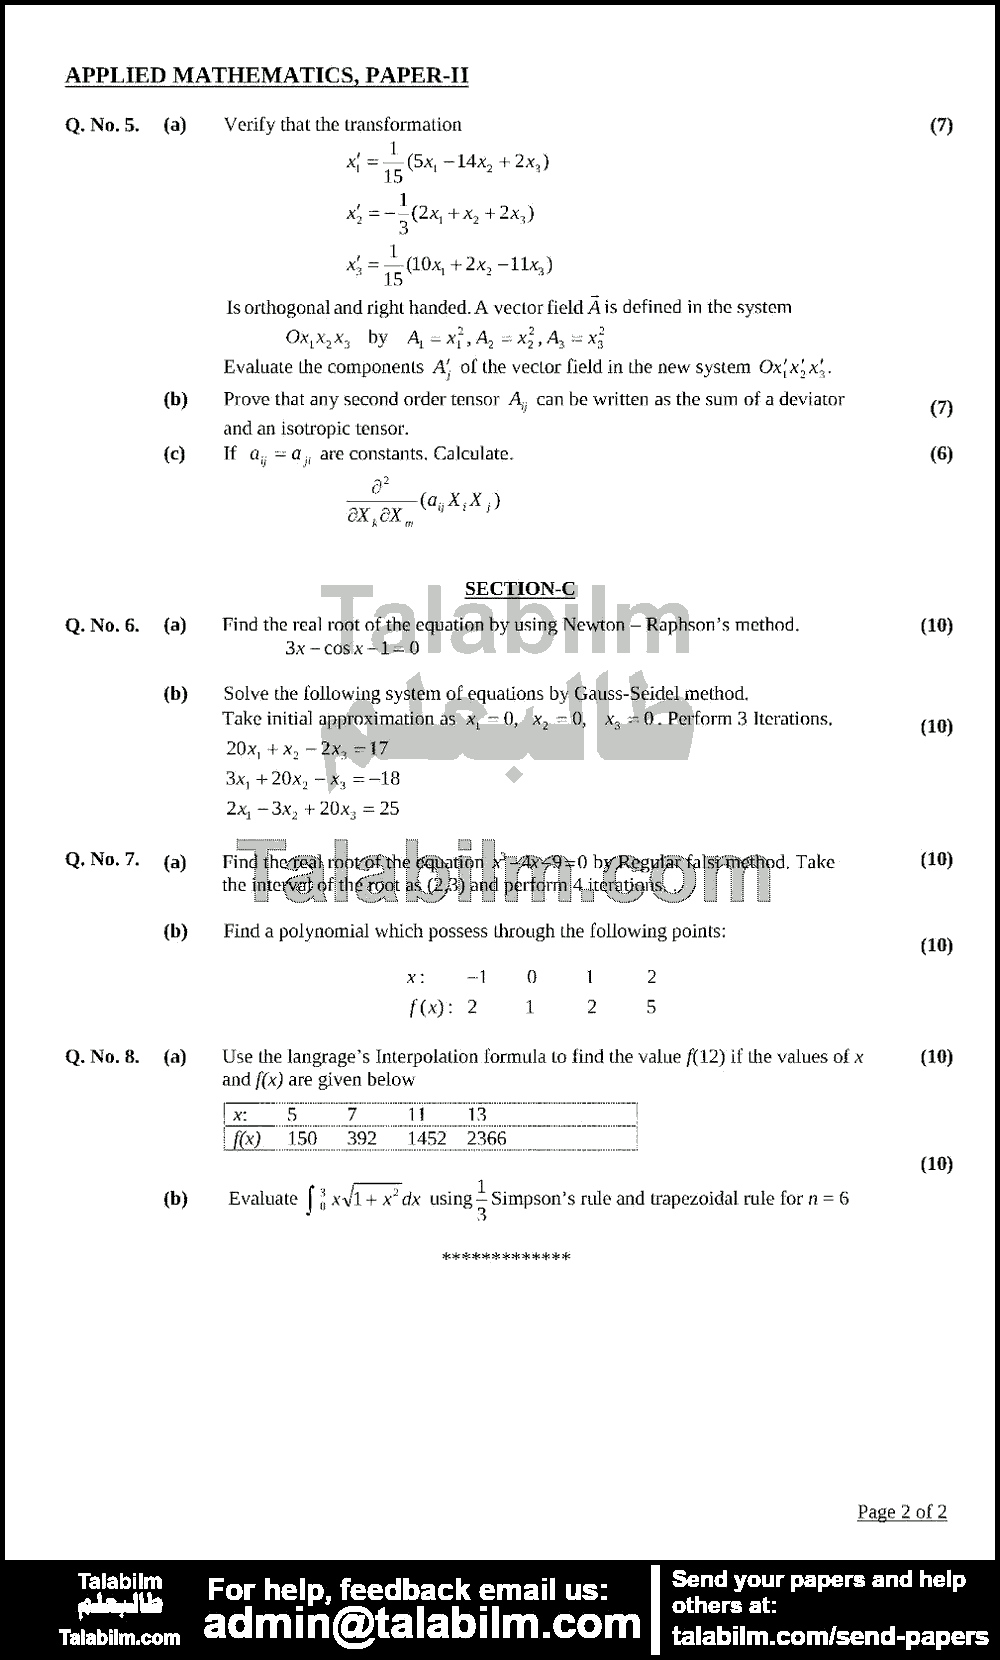 Applied Mathematics 0 past paper for 2015 Page No. 4